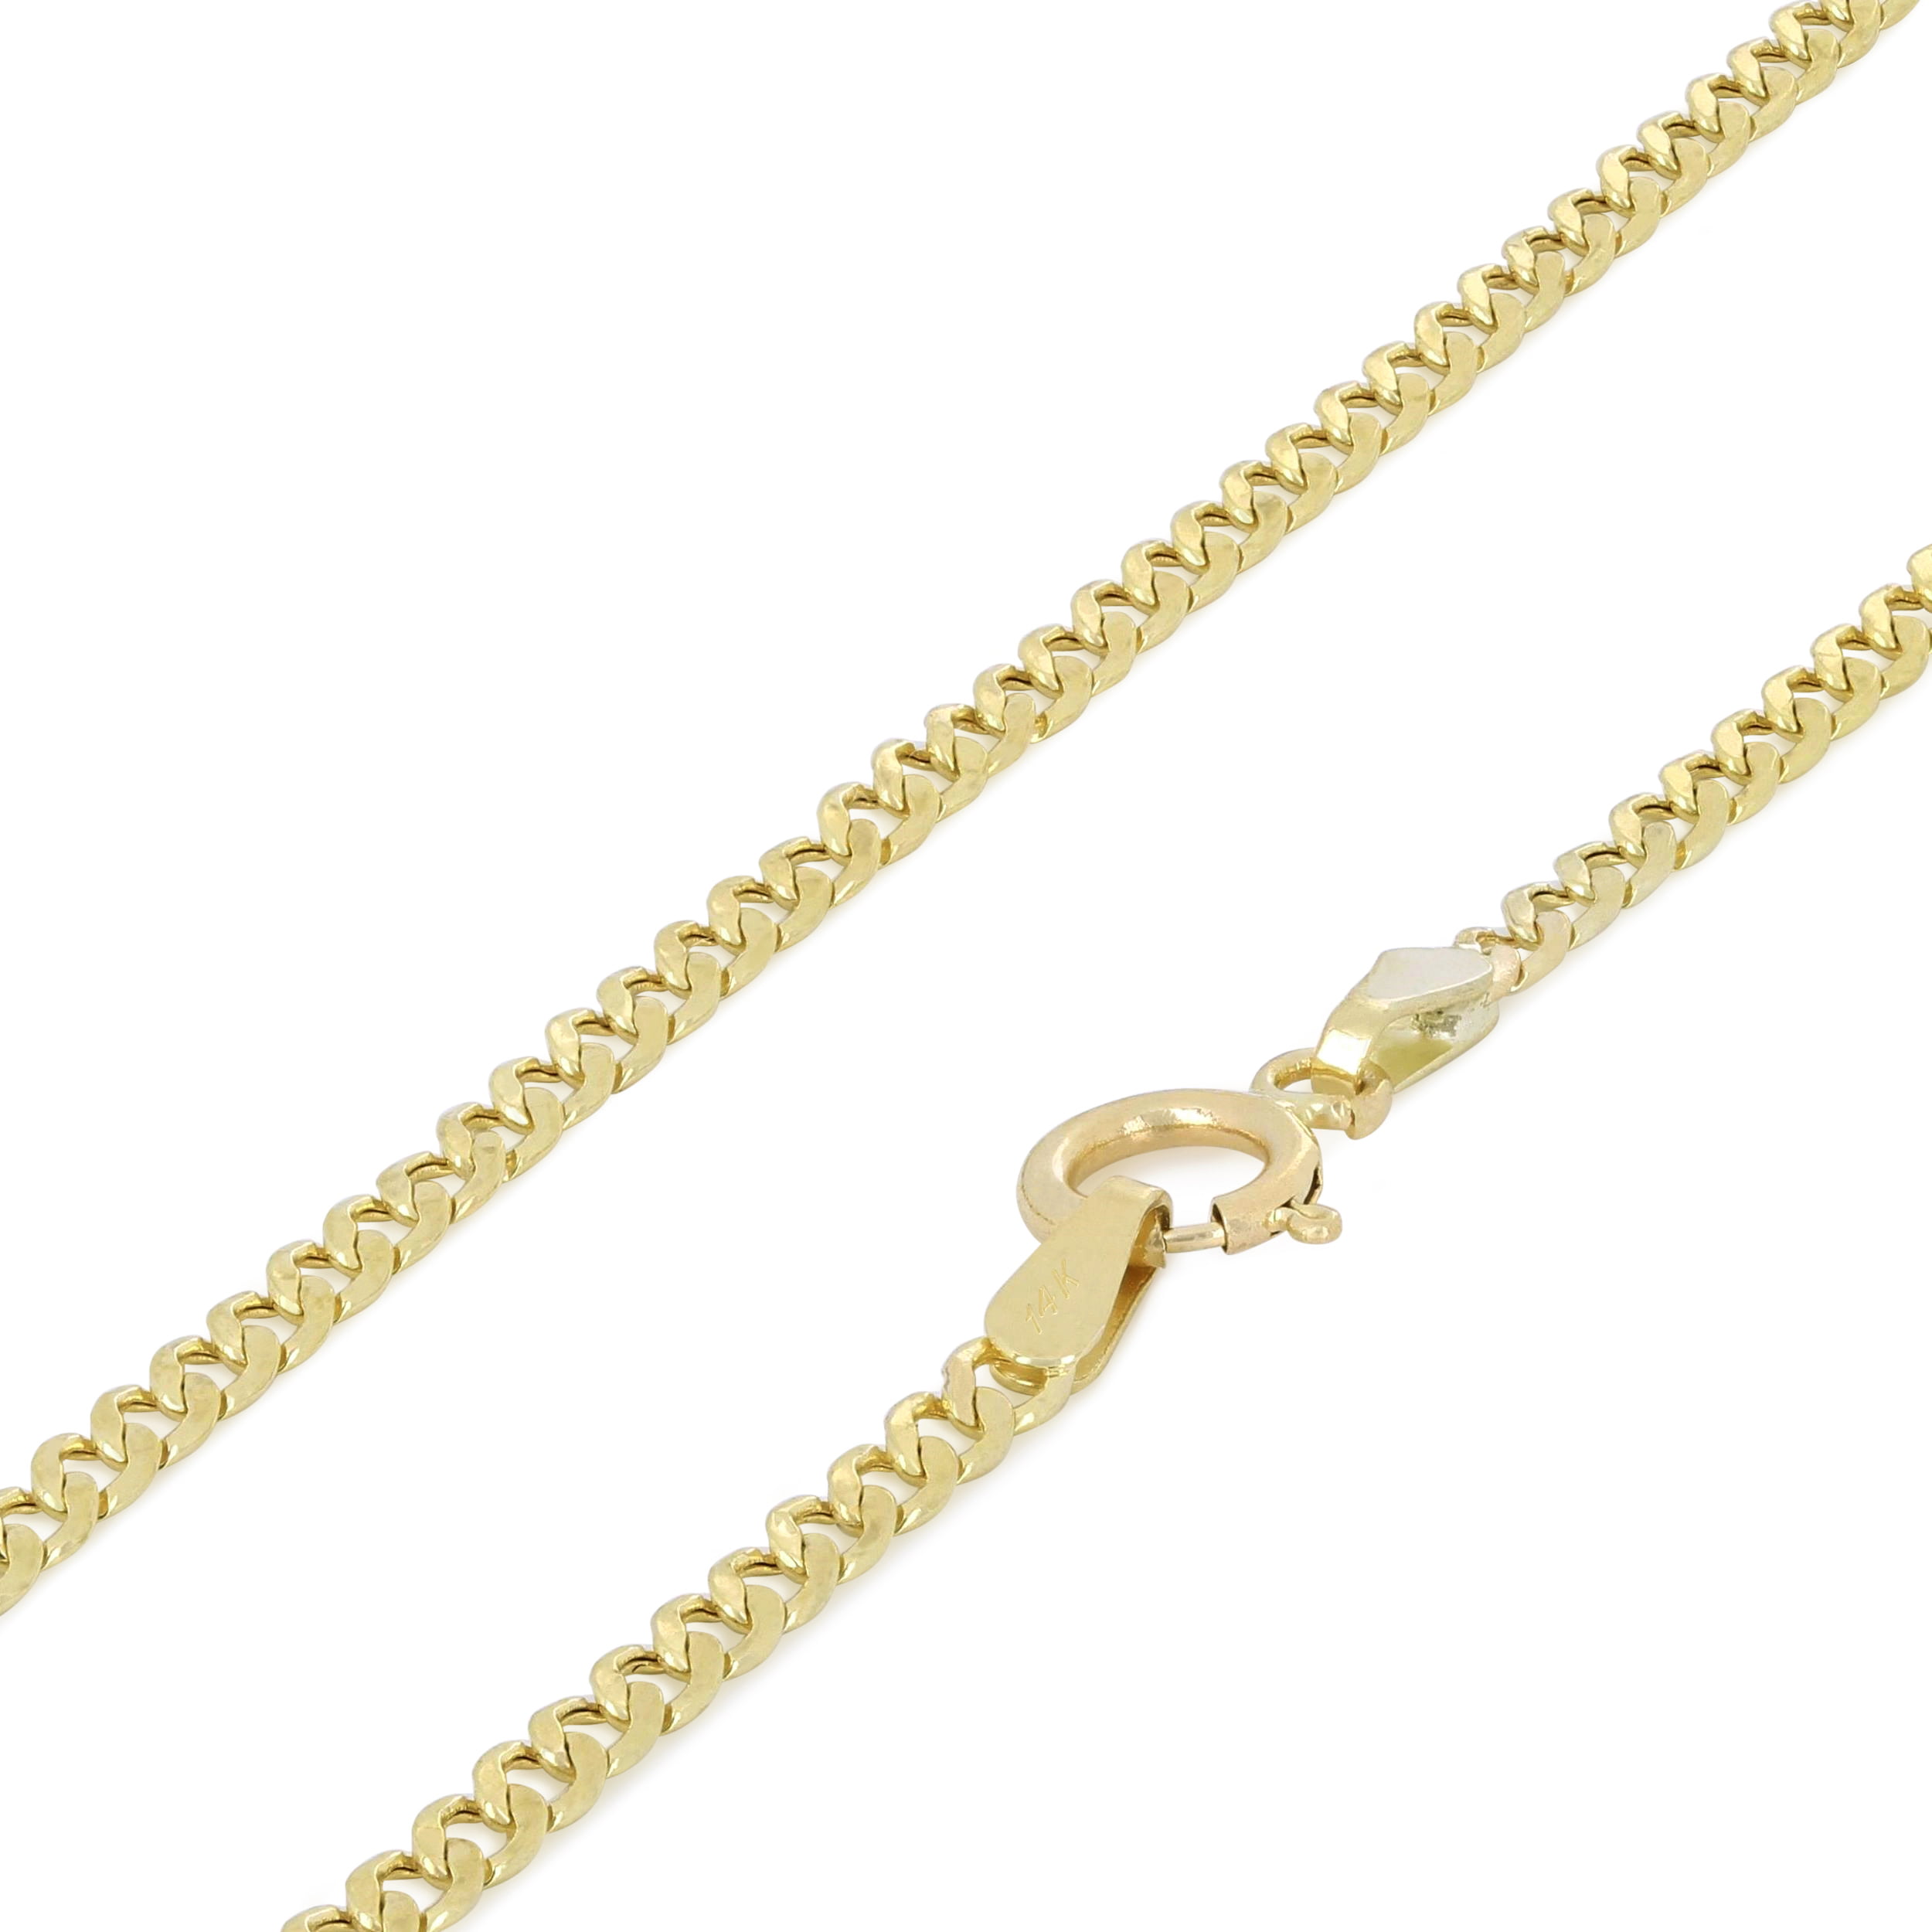 Brand New 14k Yellow Gold 2mm Cuban Curb Link Chain Necklace Size 16"-30"